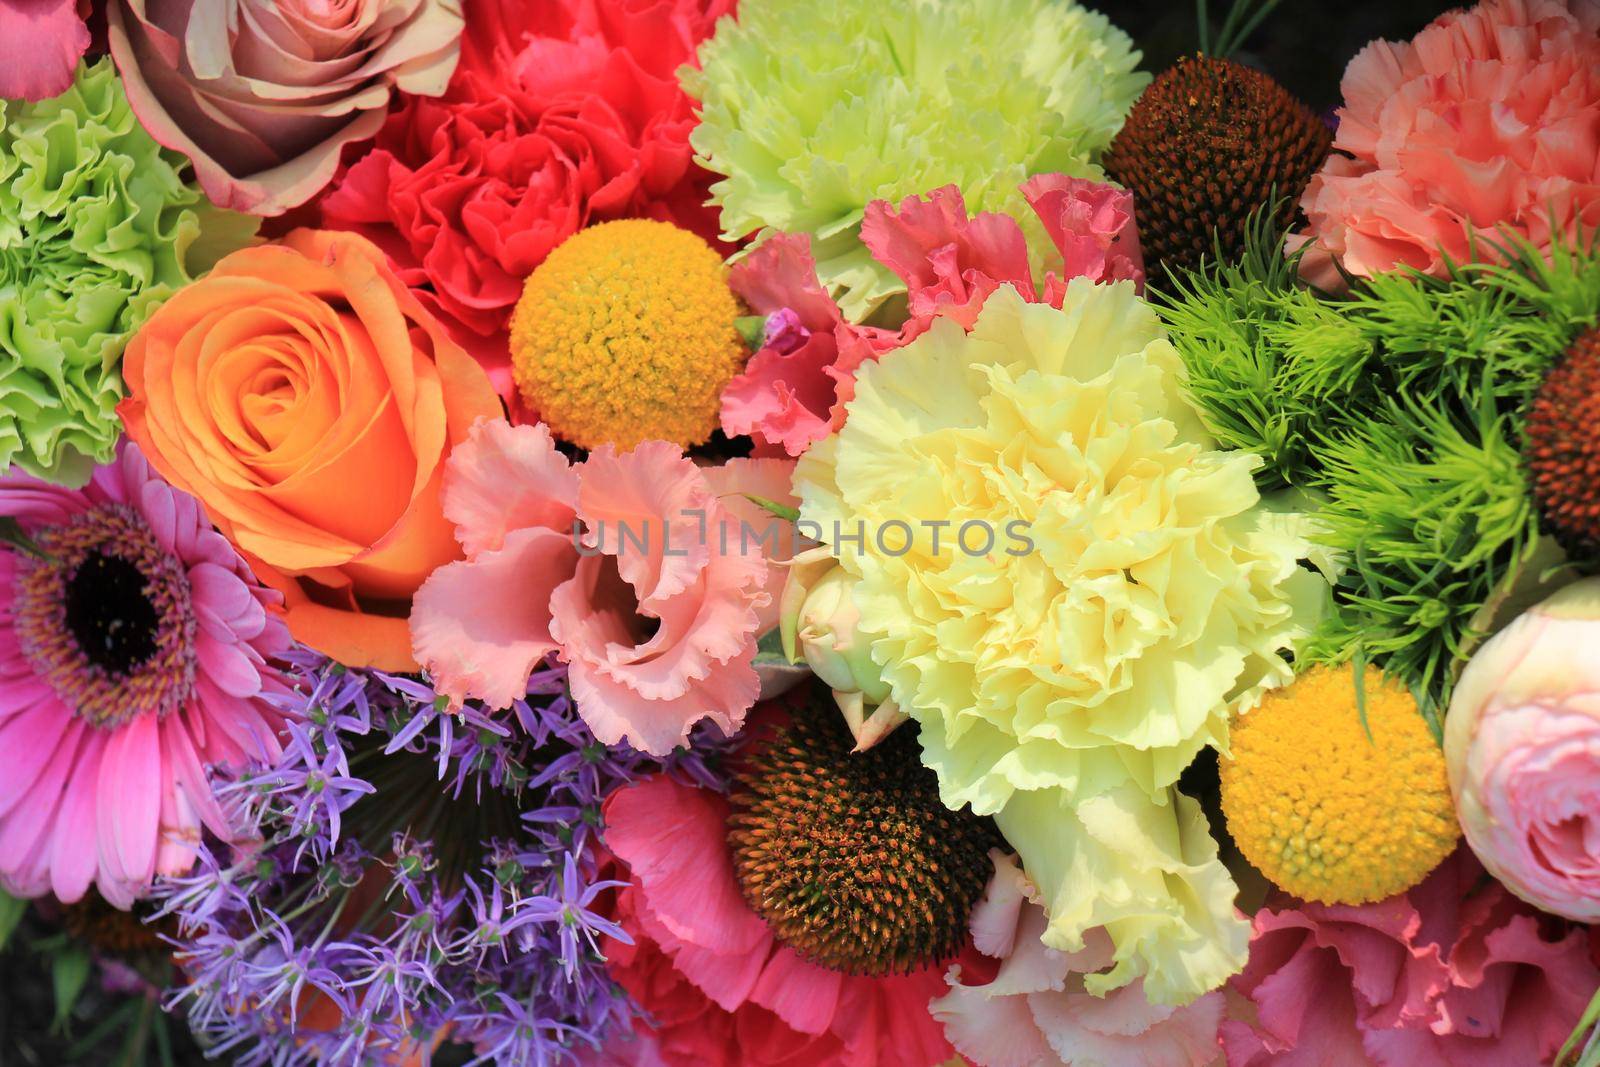 Mixed flower arrangement: various flowers in different pastel colors for a wedding